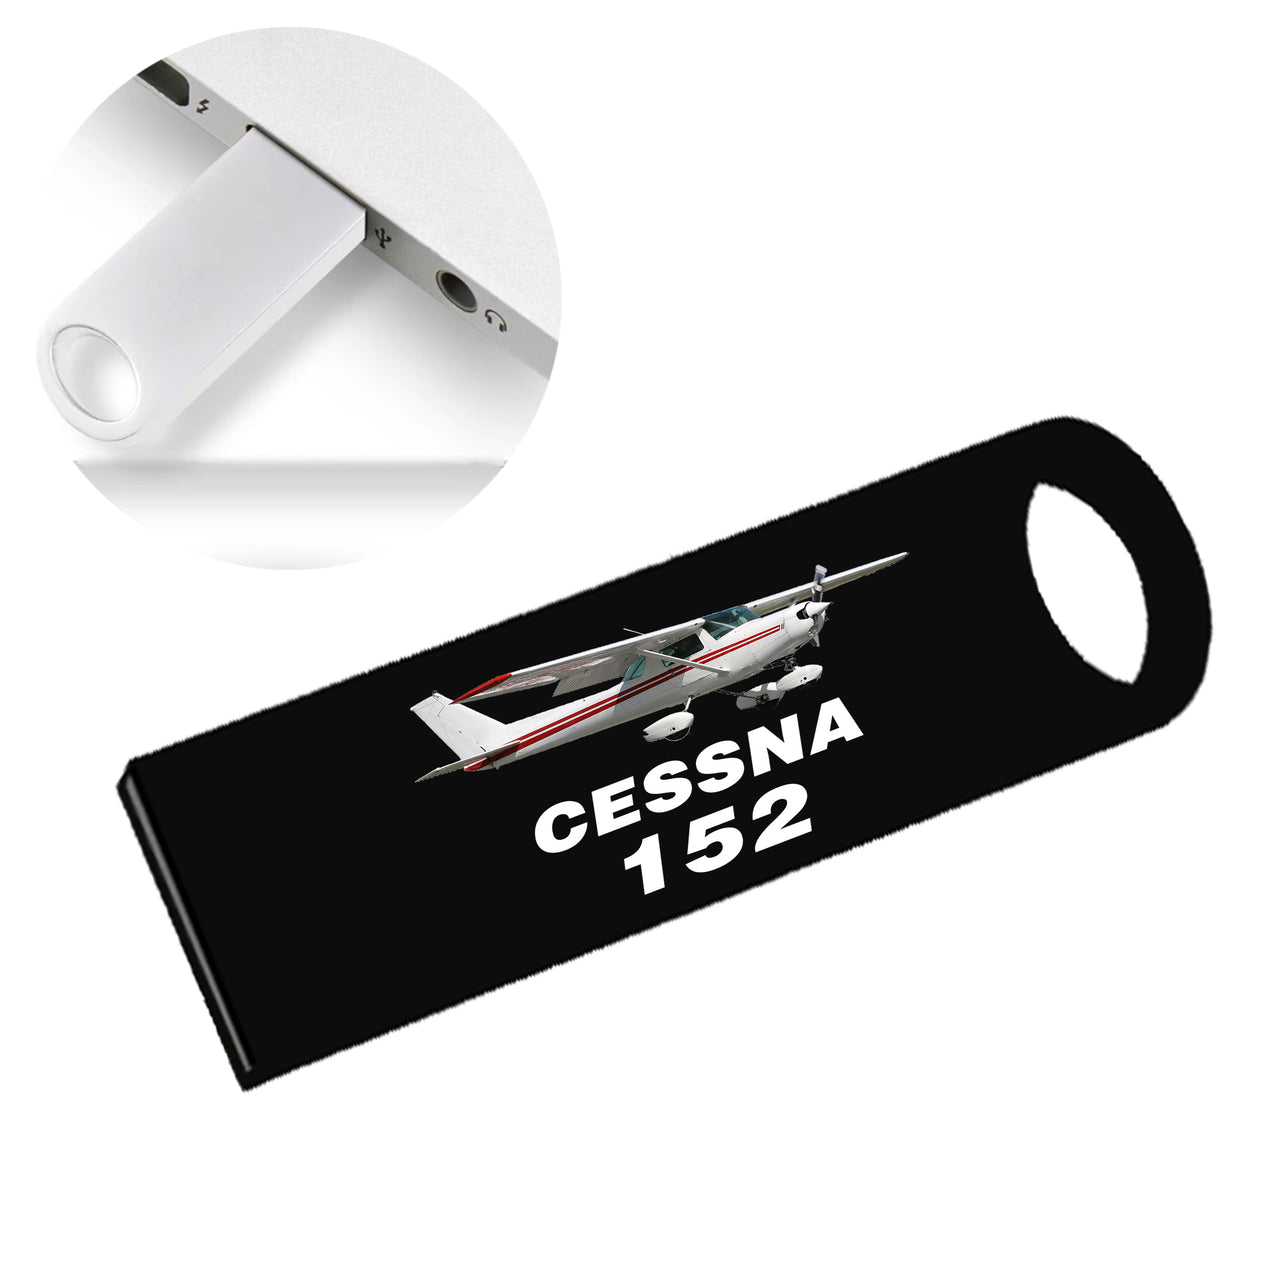 The Cessna 152 Designed Waterproof USB Devices